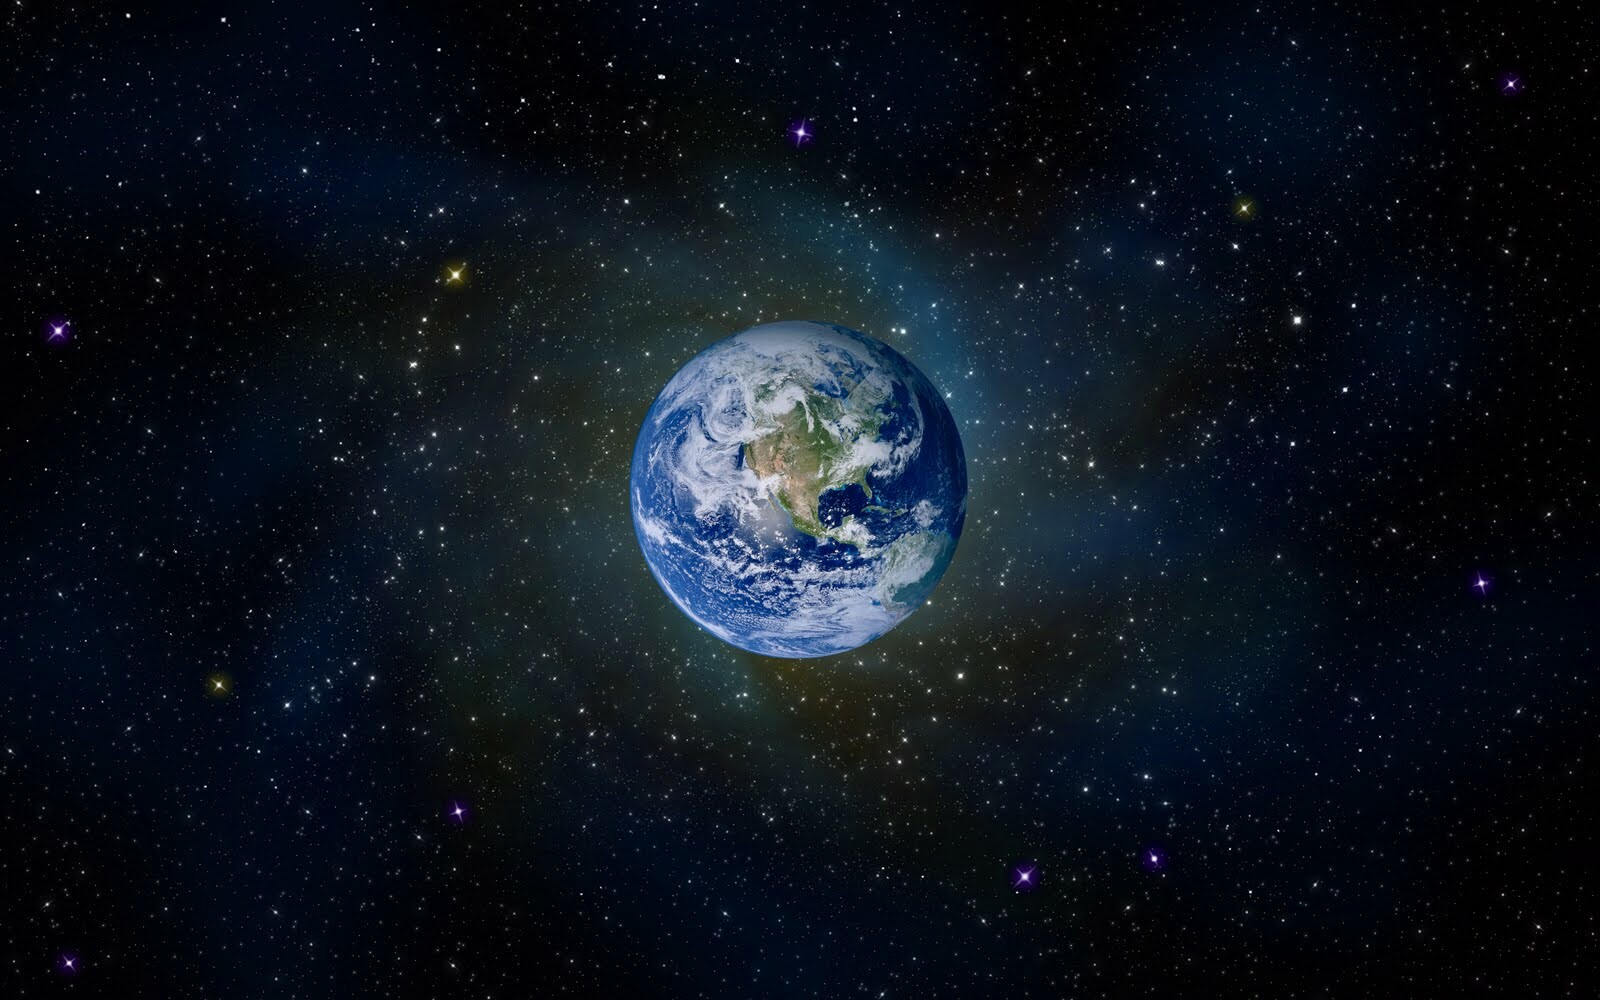 Earth Wallpaper: HD, 4K, 5K for PC and Mobile. Download free image for iPhone, Android